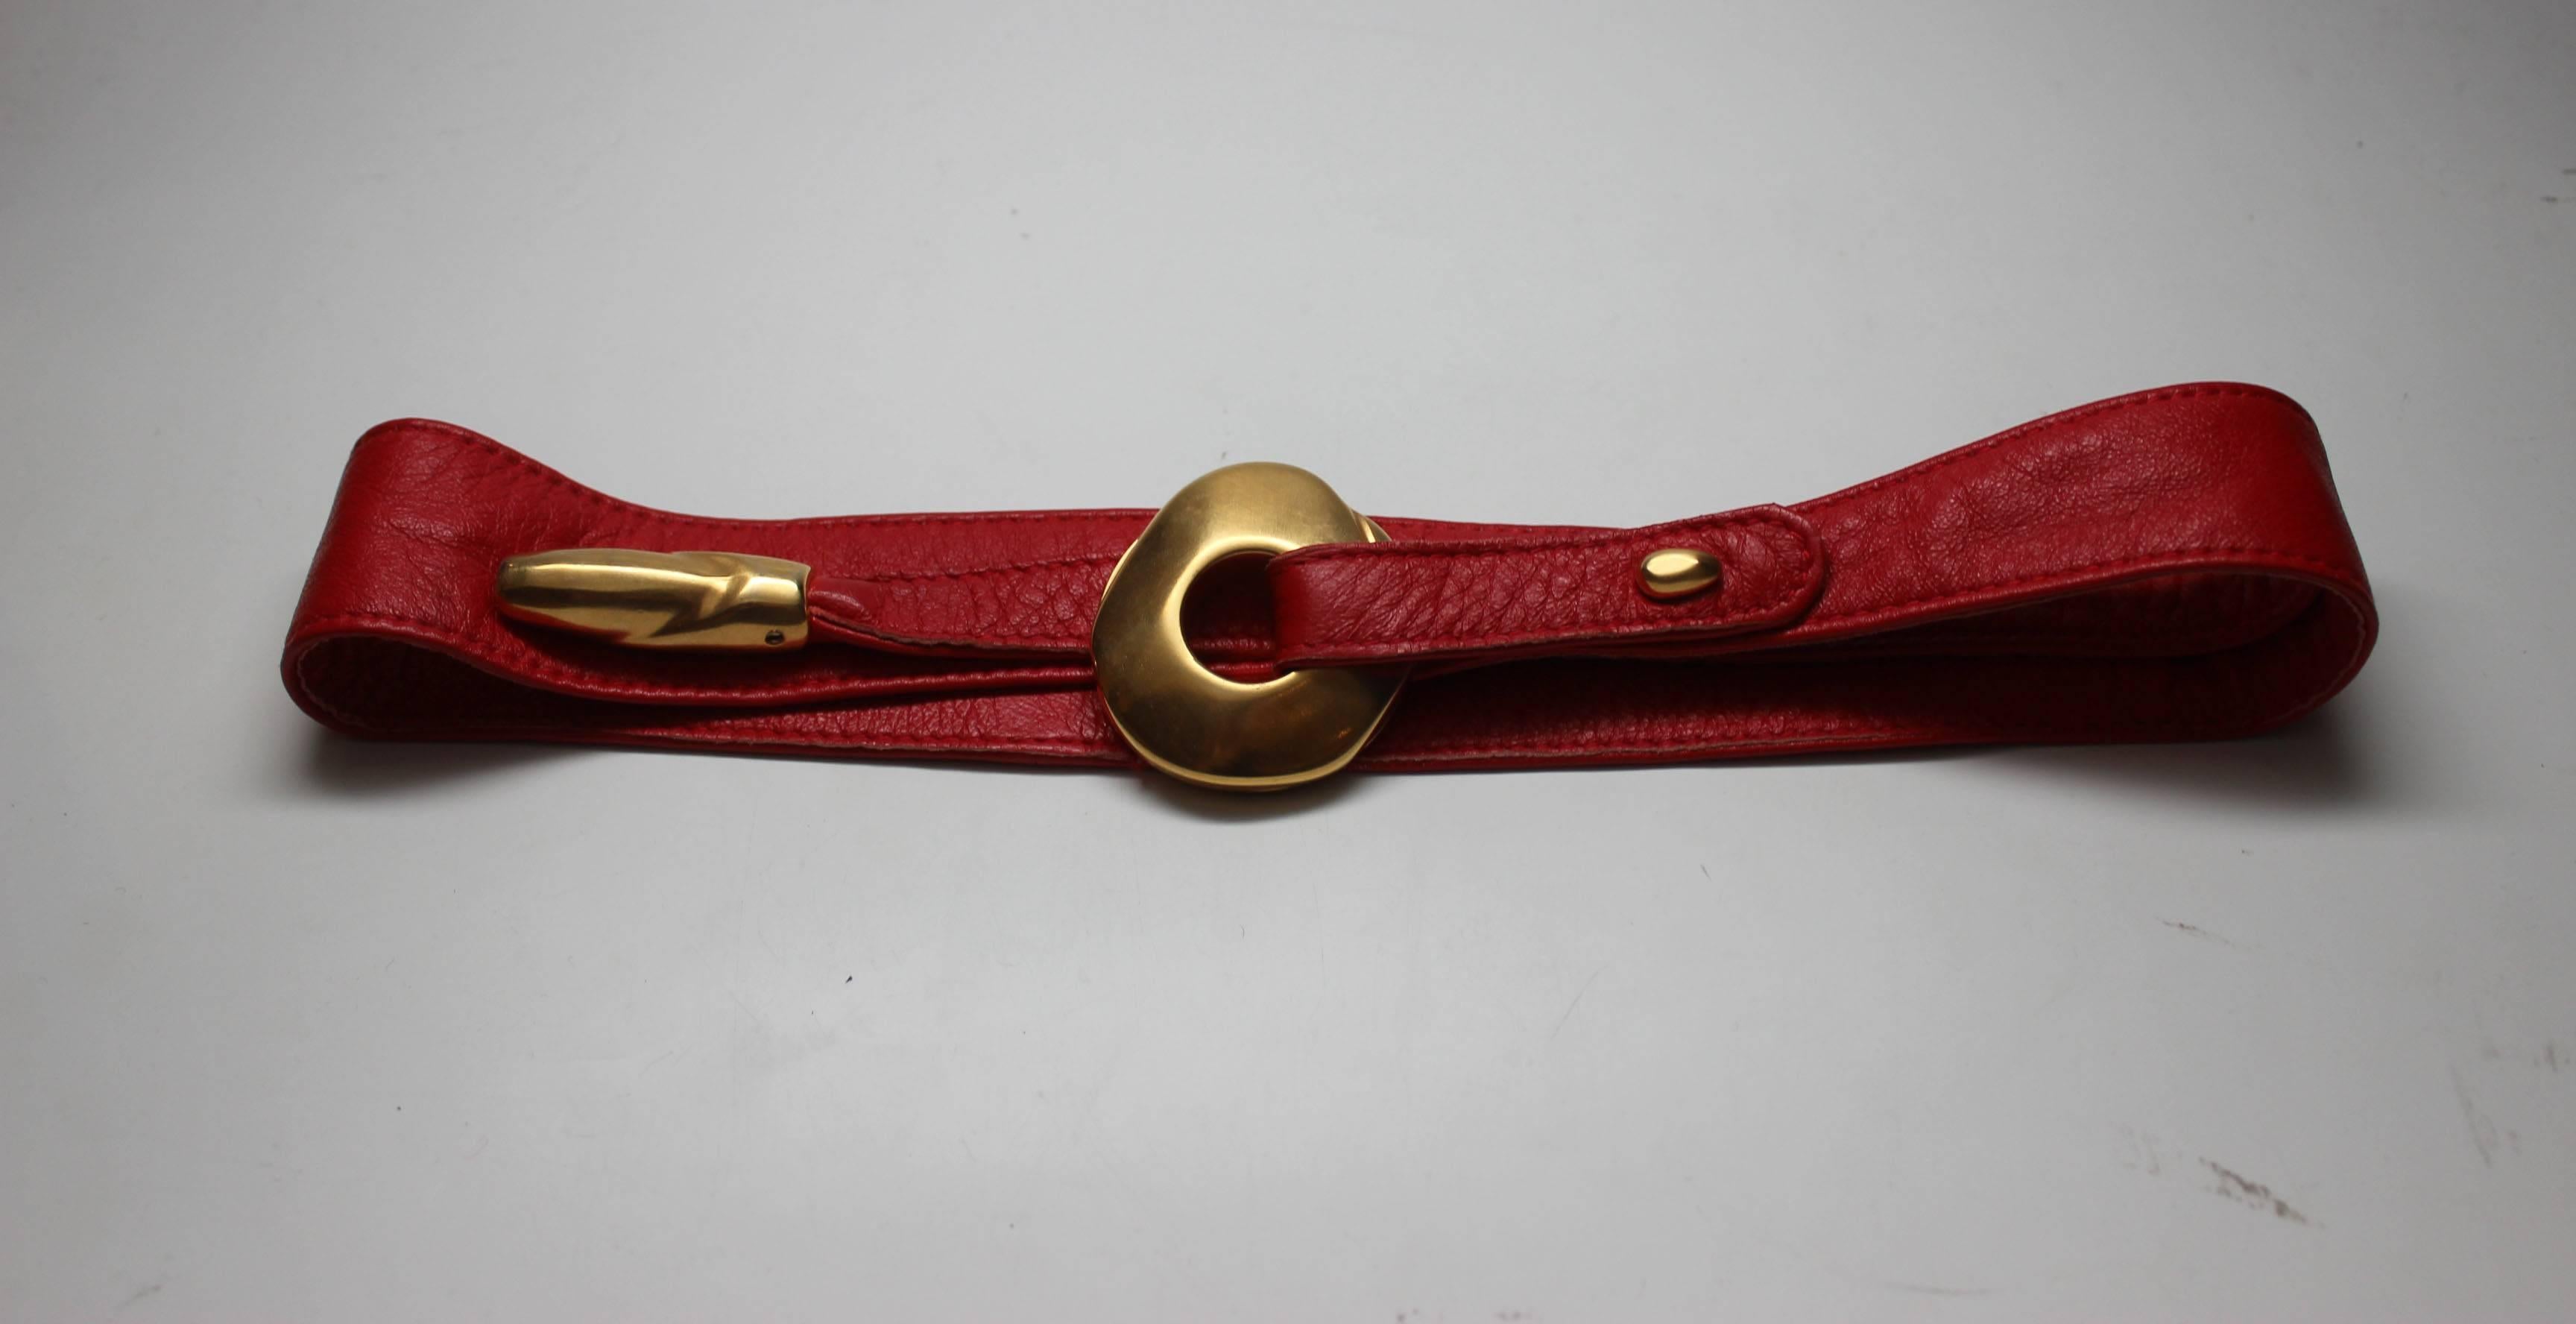 Donna Karan's accesories often have unique sculptural details. This vibrant red leather belt closes by looping one end through a gold orb, which then wraps around the belt. The end is encased in another bit of gold hardware. This belt can be worn